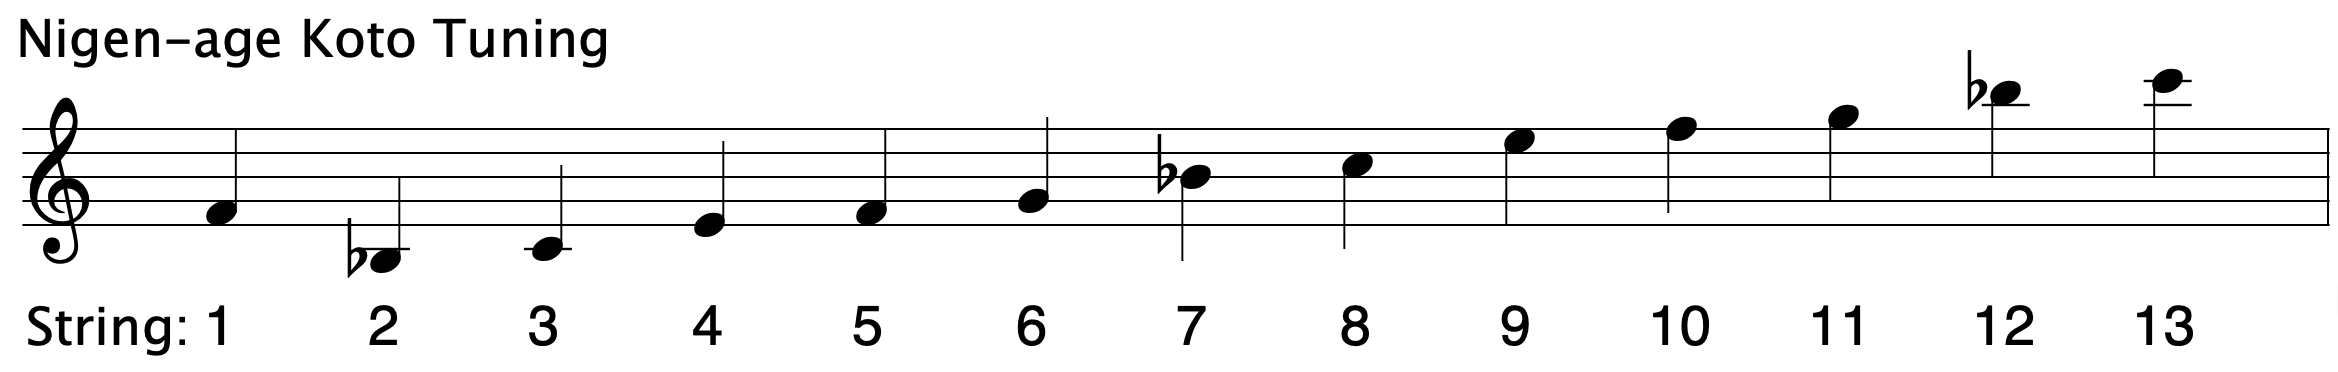  Nigen-age Koto Tuning ranging from B3b to C6, With E5, No A's 